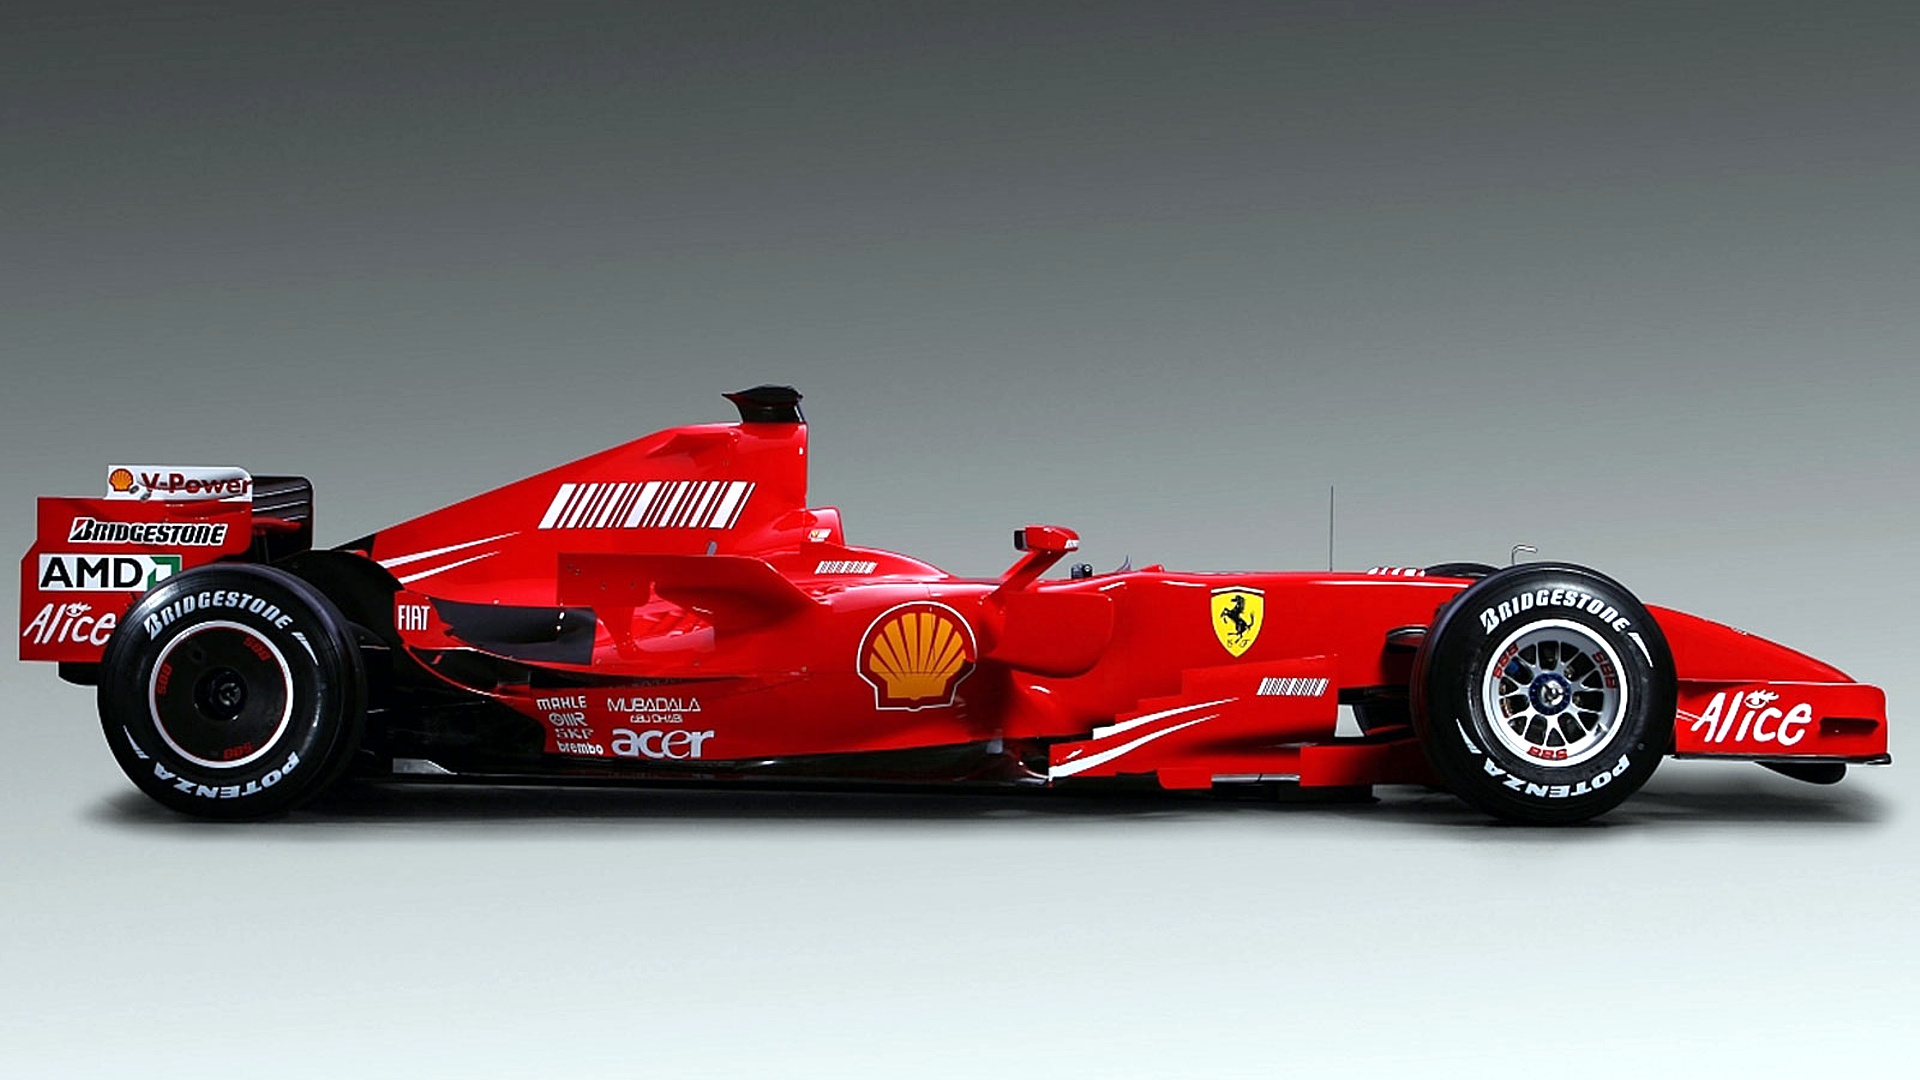 HD Wallpaper Background For Your Desktop F1 Cars Are